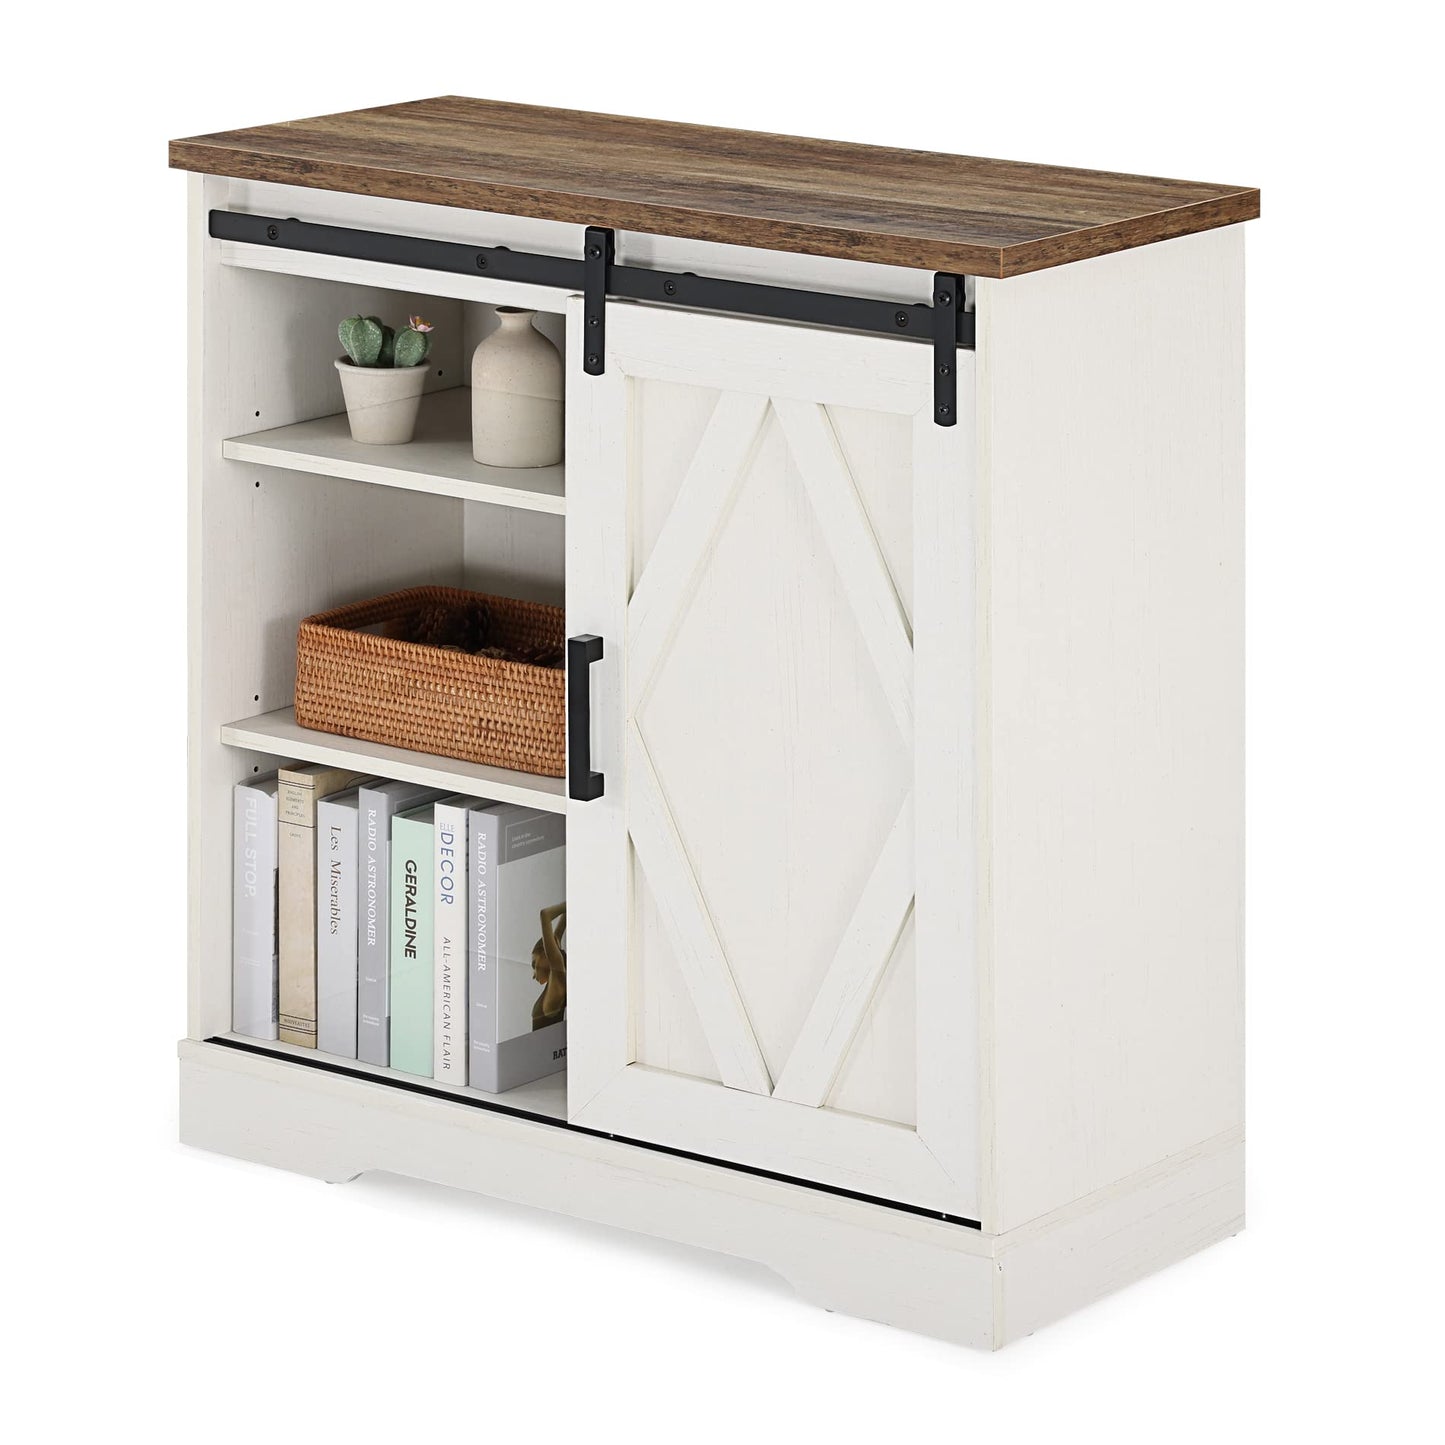 WAMPAT LED Accent Cabinet Coffee Bar Buffet Entryway Storage Table for Living Room, Bathroom and Home Kitchen,White